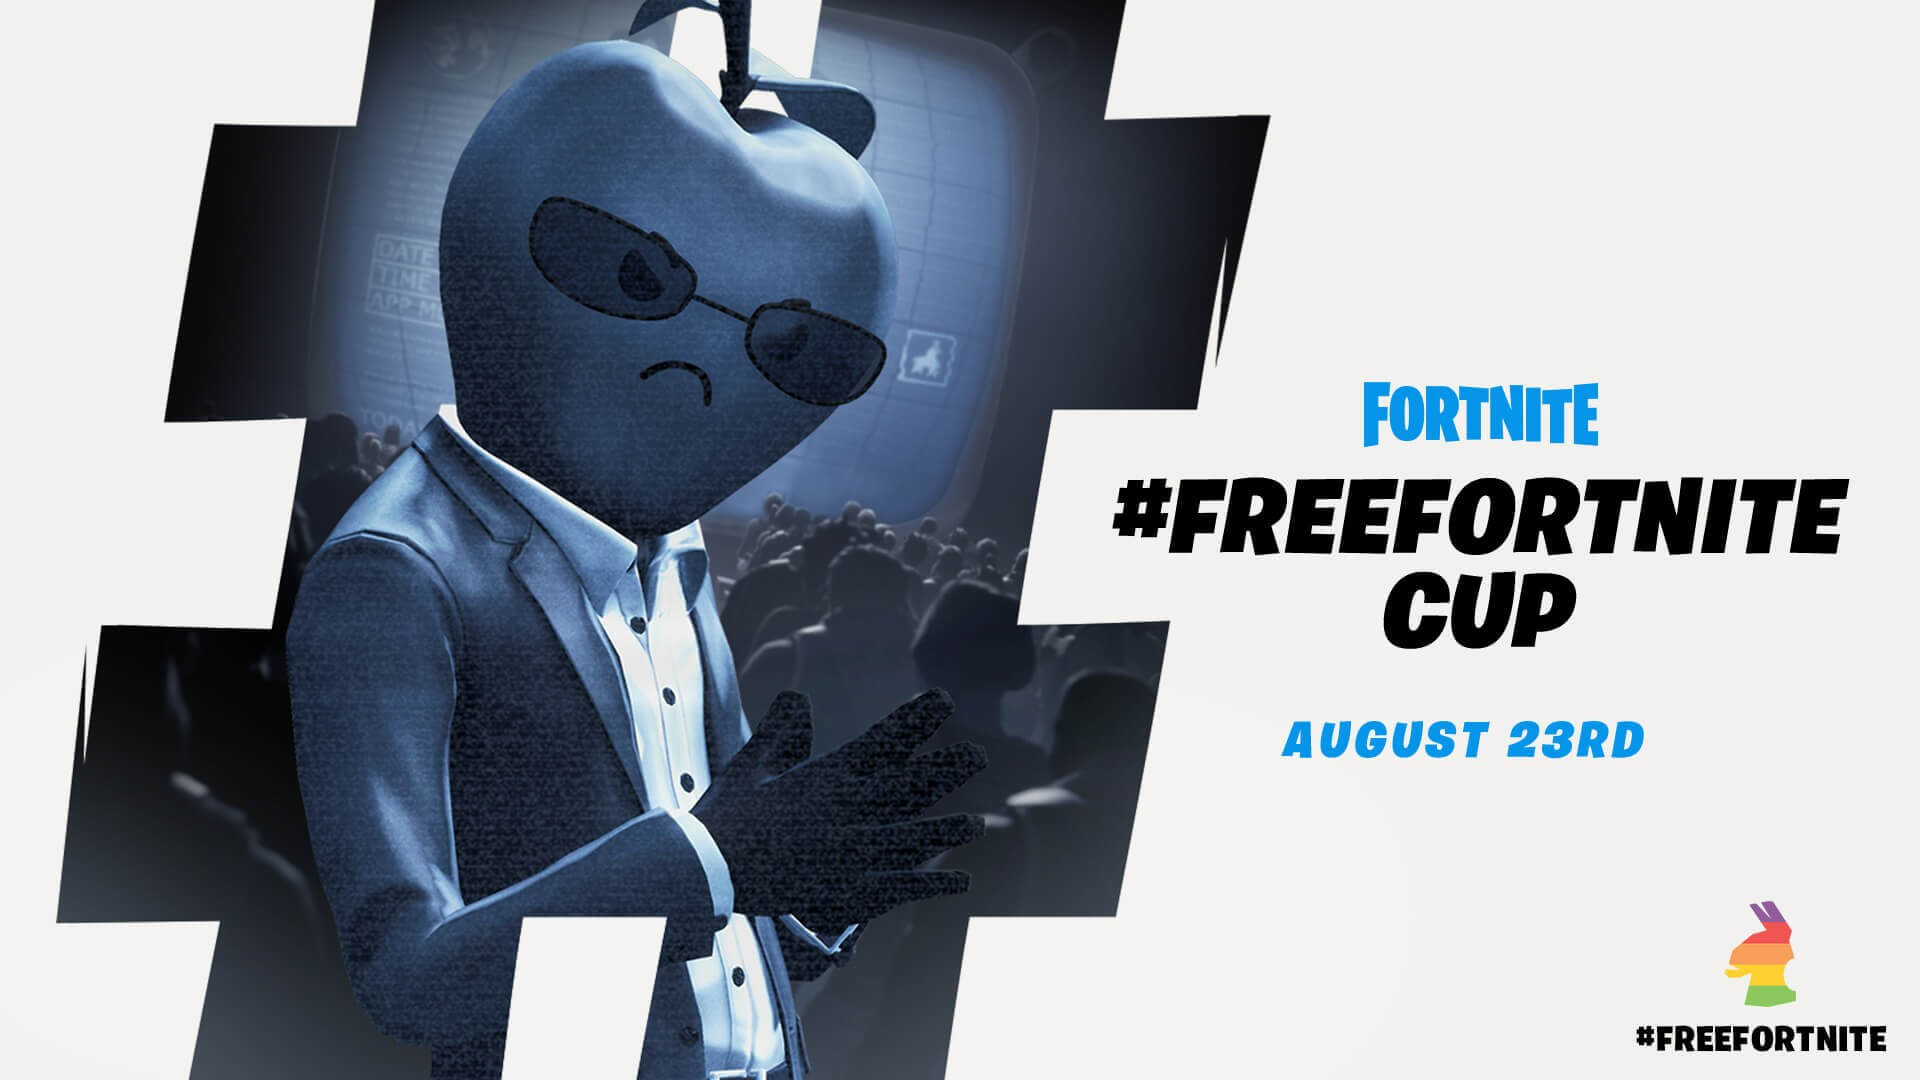 Epic Games is hosting a Fortnite tournament with Apple-free prizes on offer